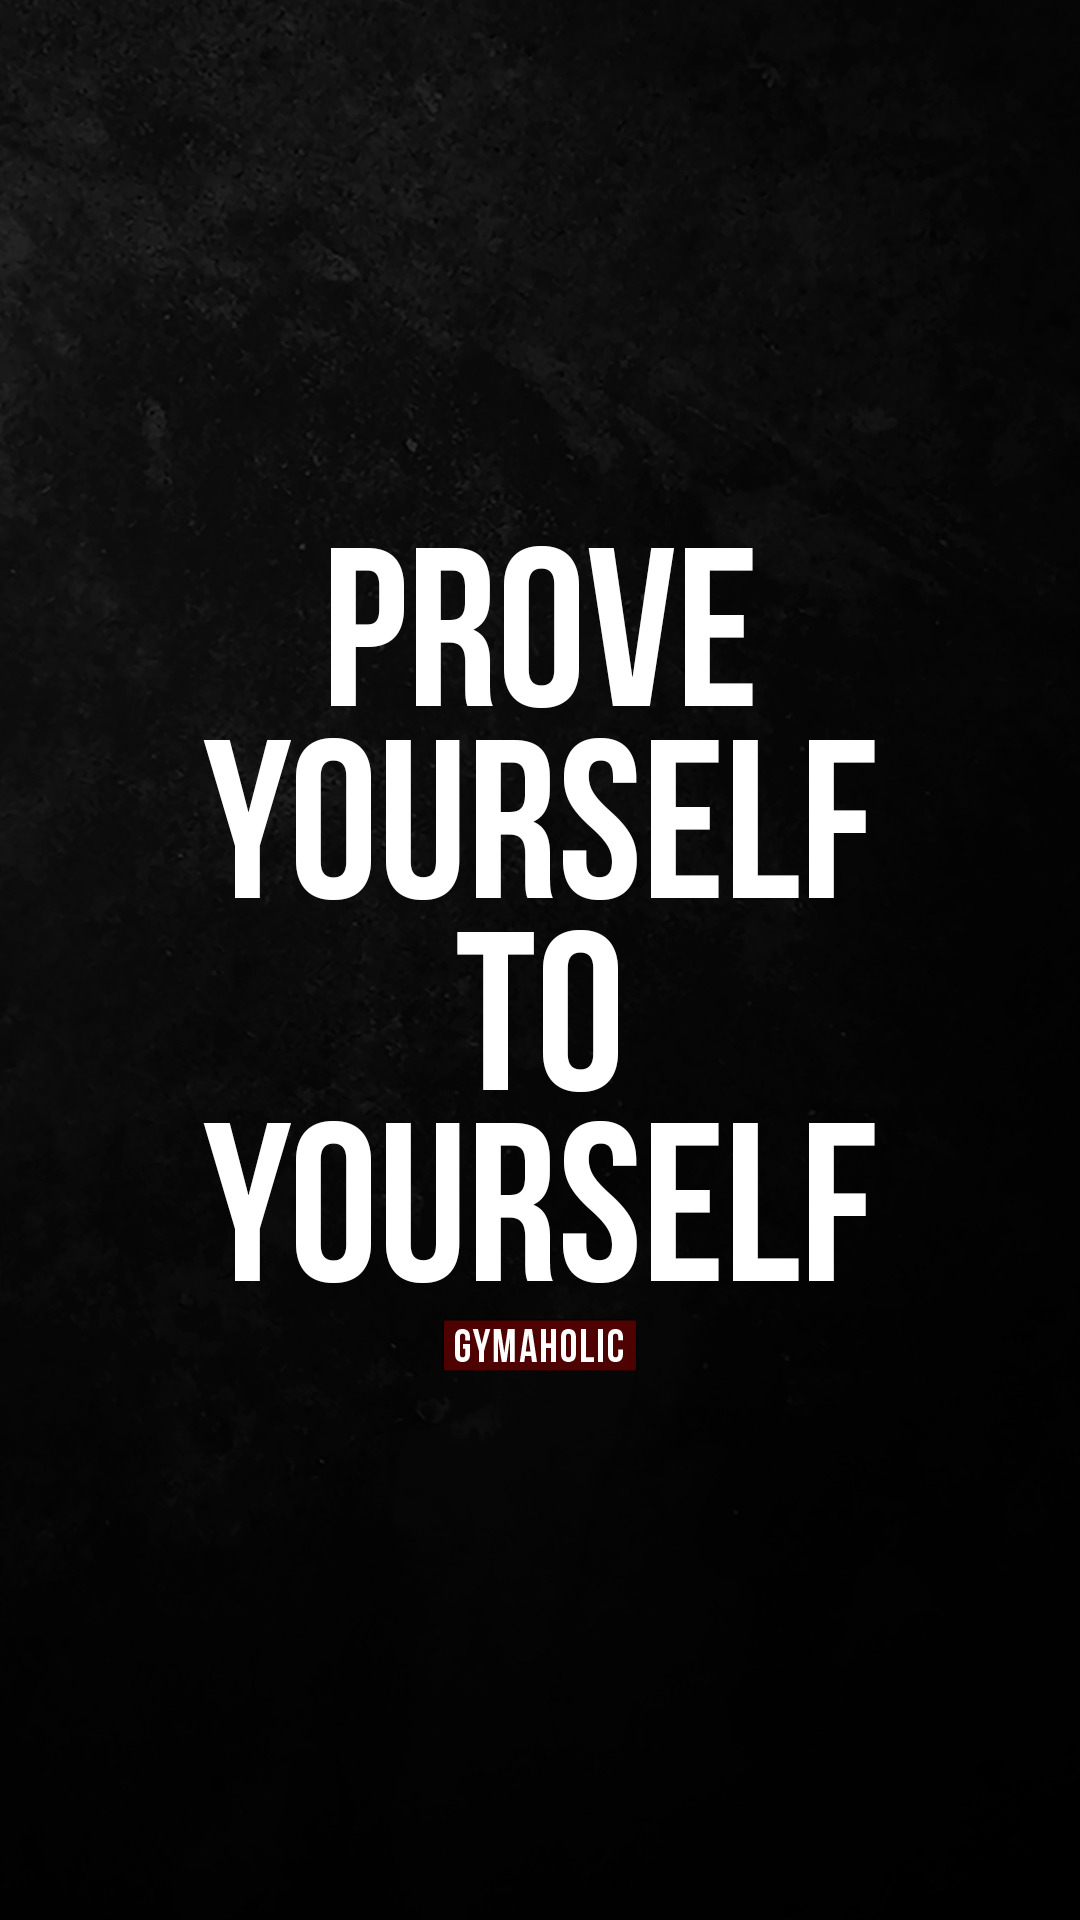 Prove yourself to yourself